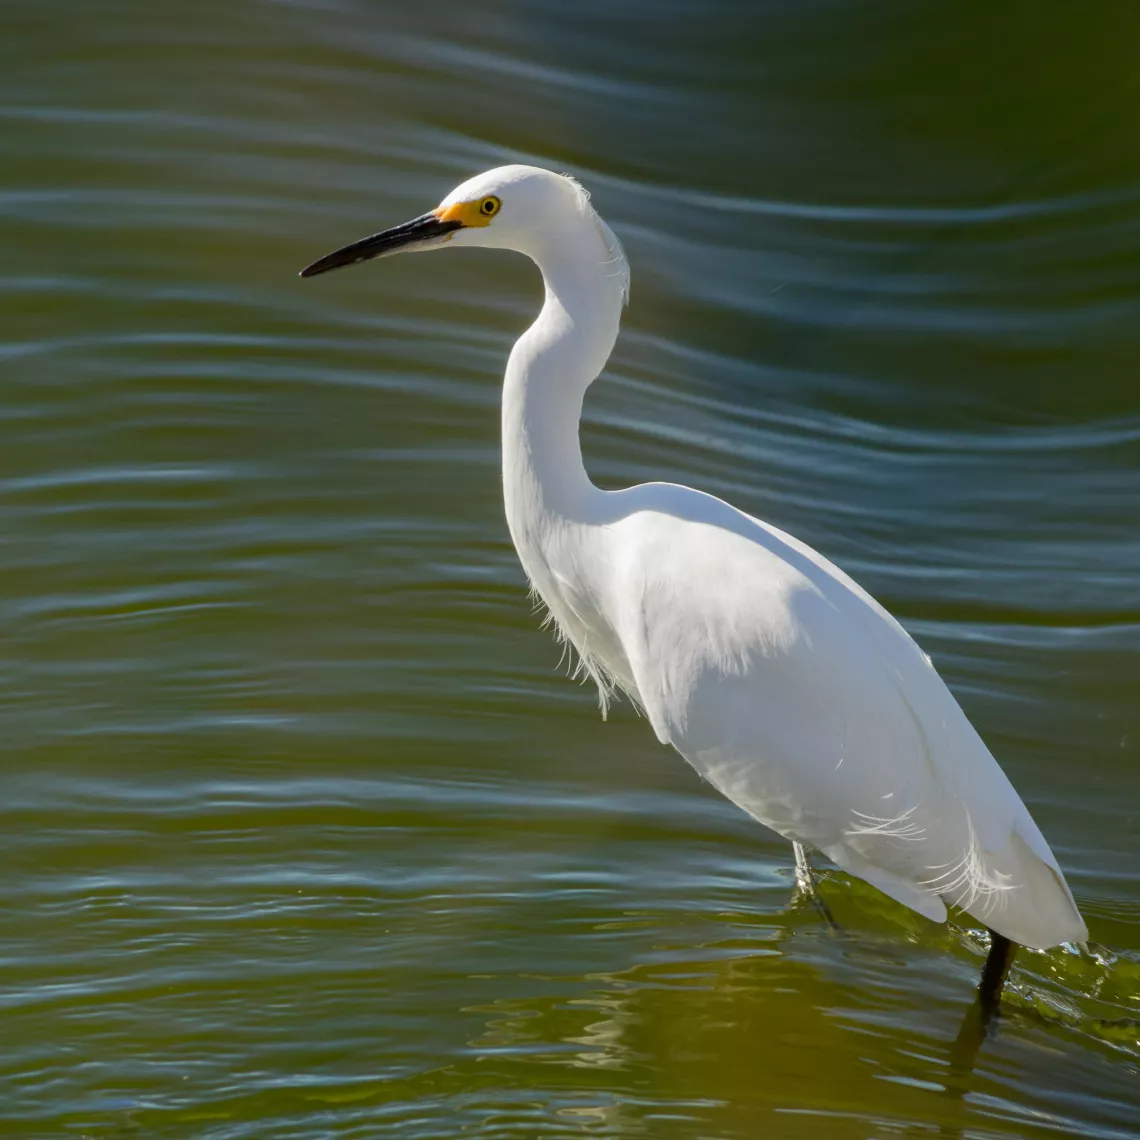 White bird stands in rippling water.